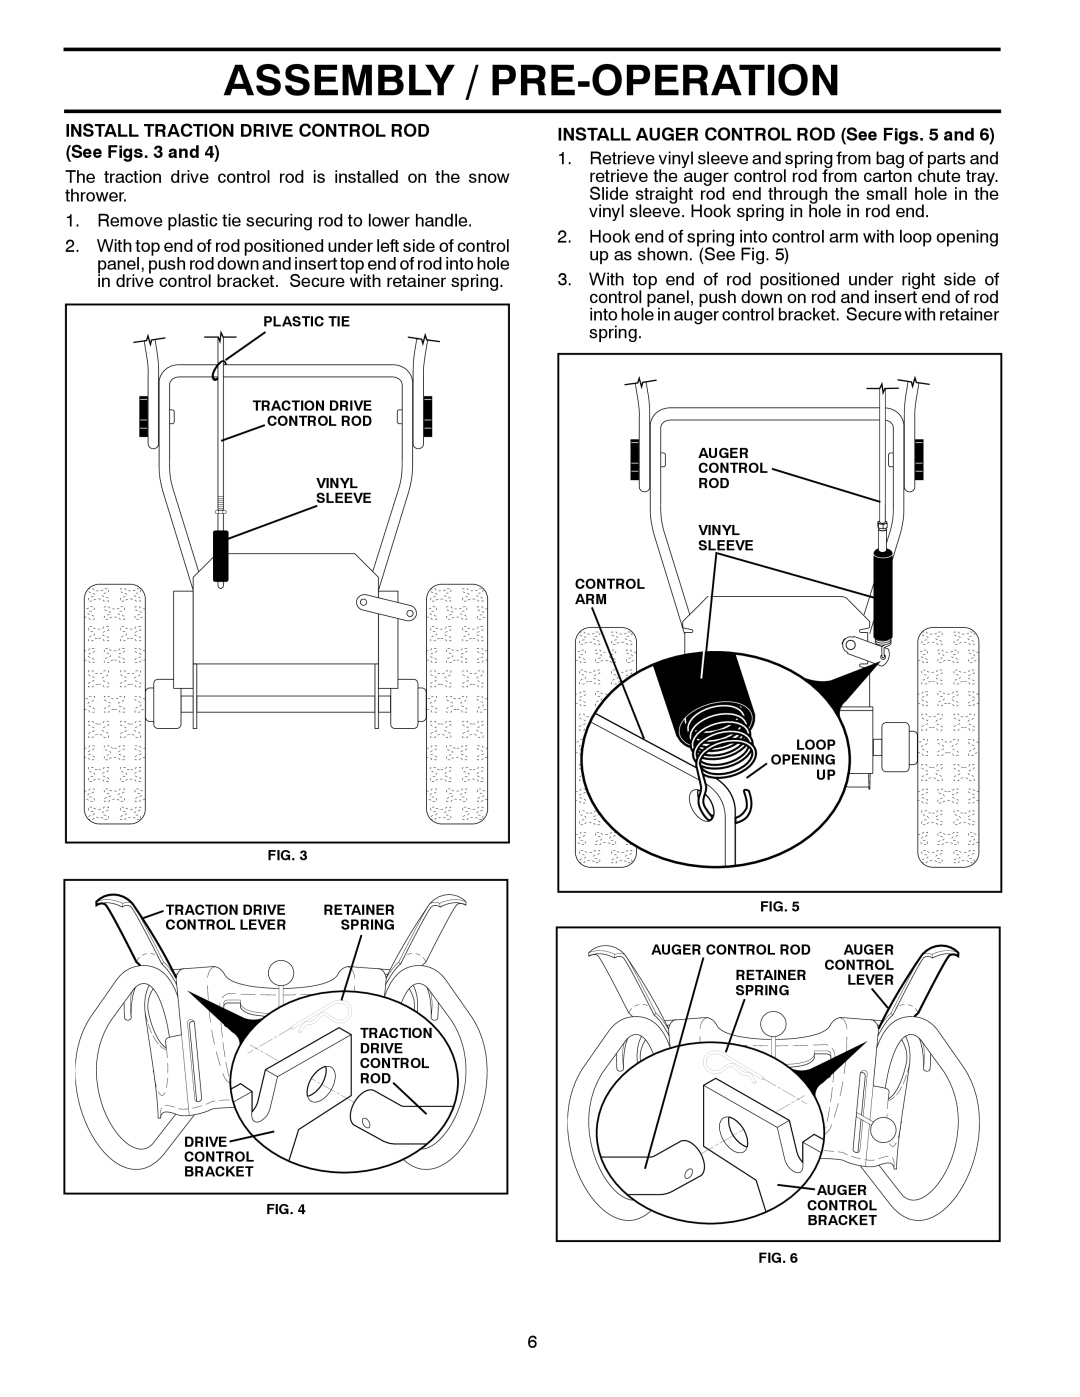 Poulan 429890 owner manual Assembly / Pre-Operation, INSTALL AUGER CONTROL ROD See Figs. 5 and 